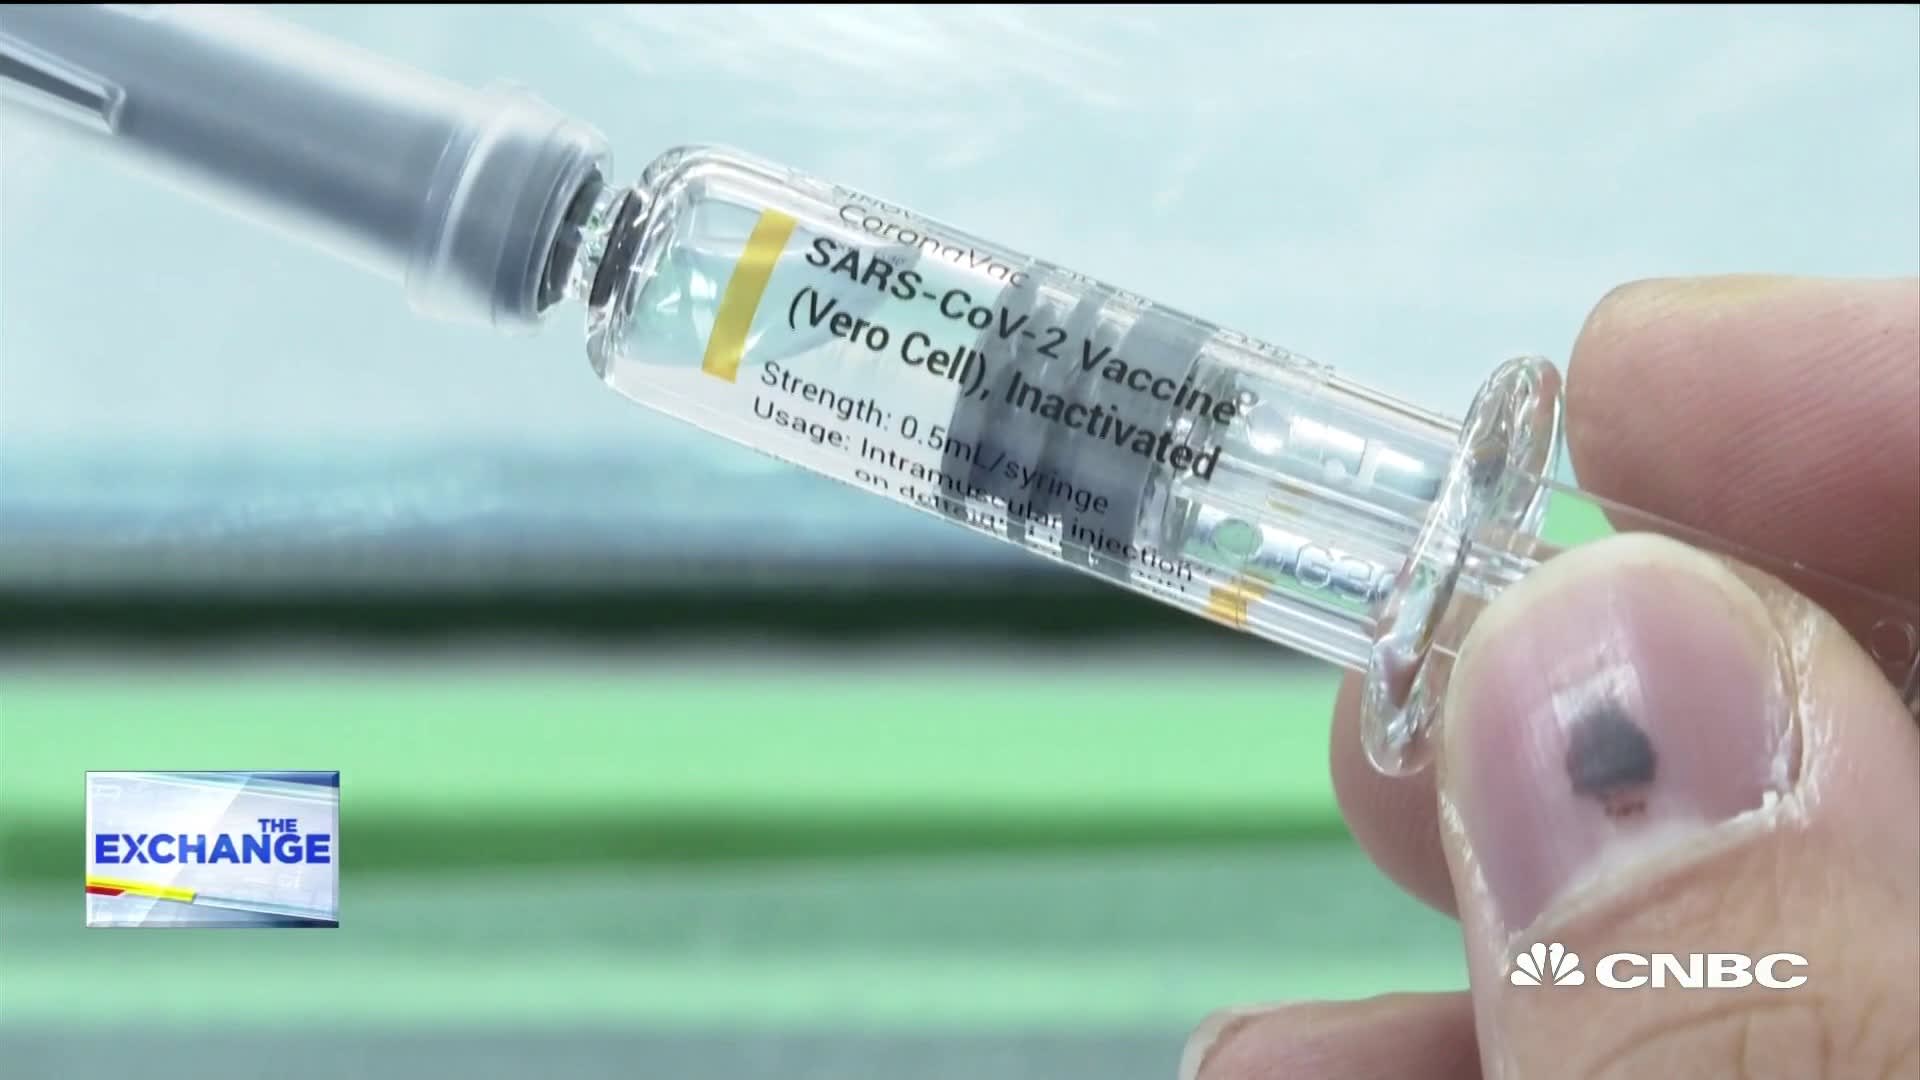 Sinopharm vaccine made in which country